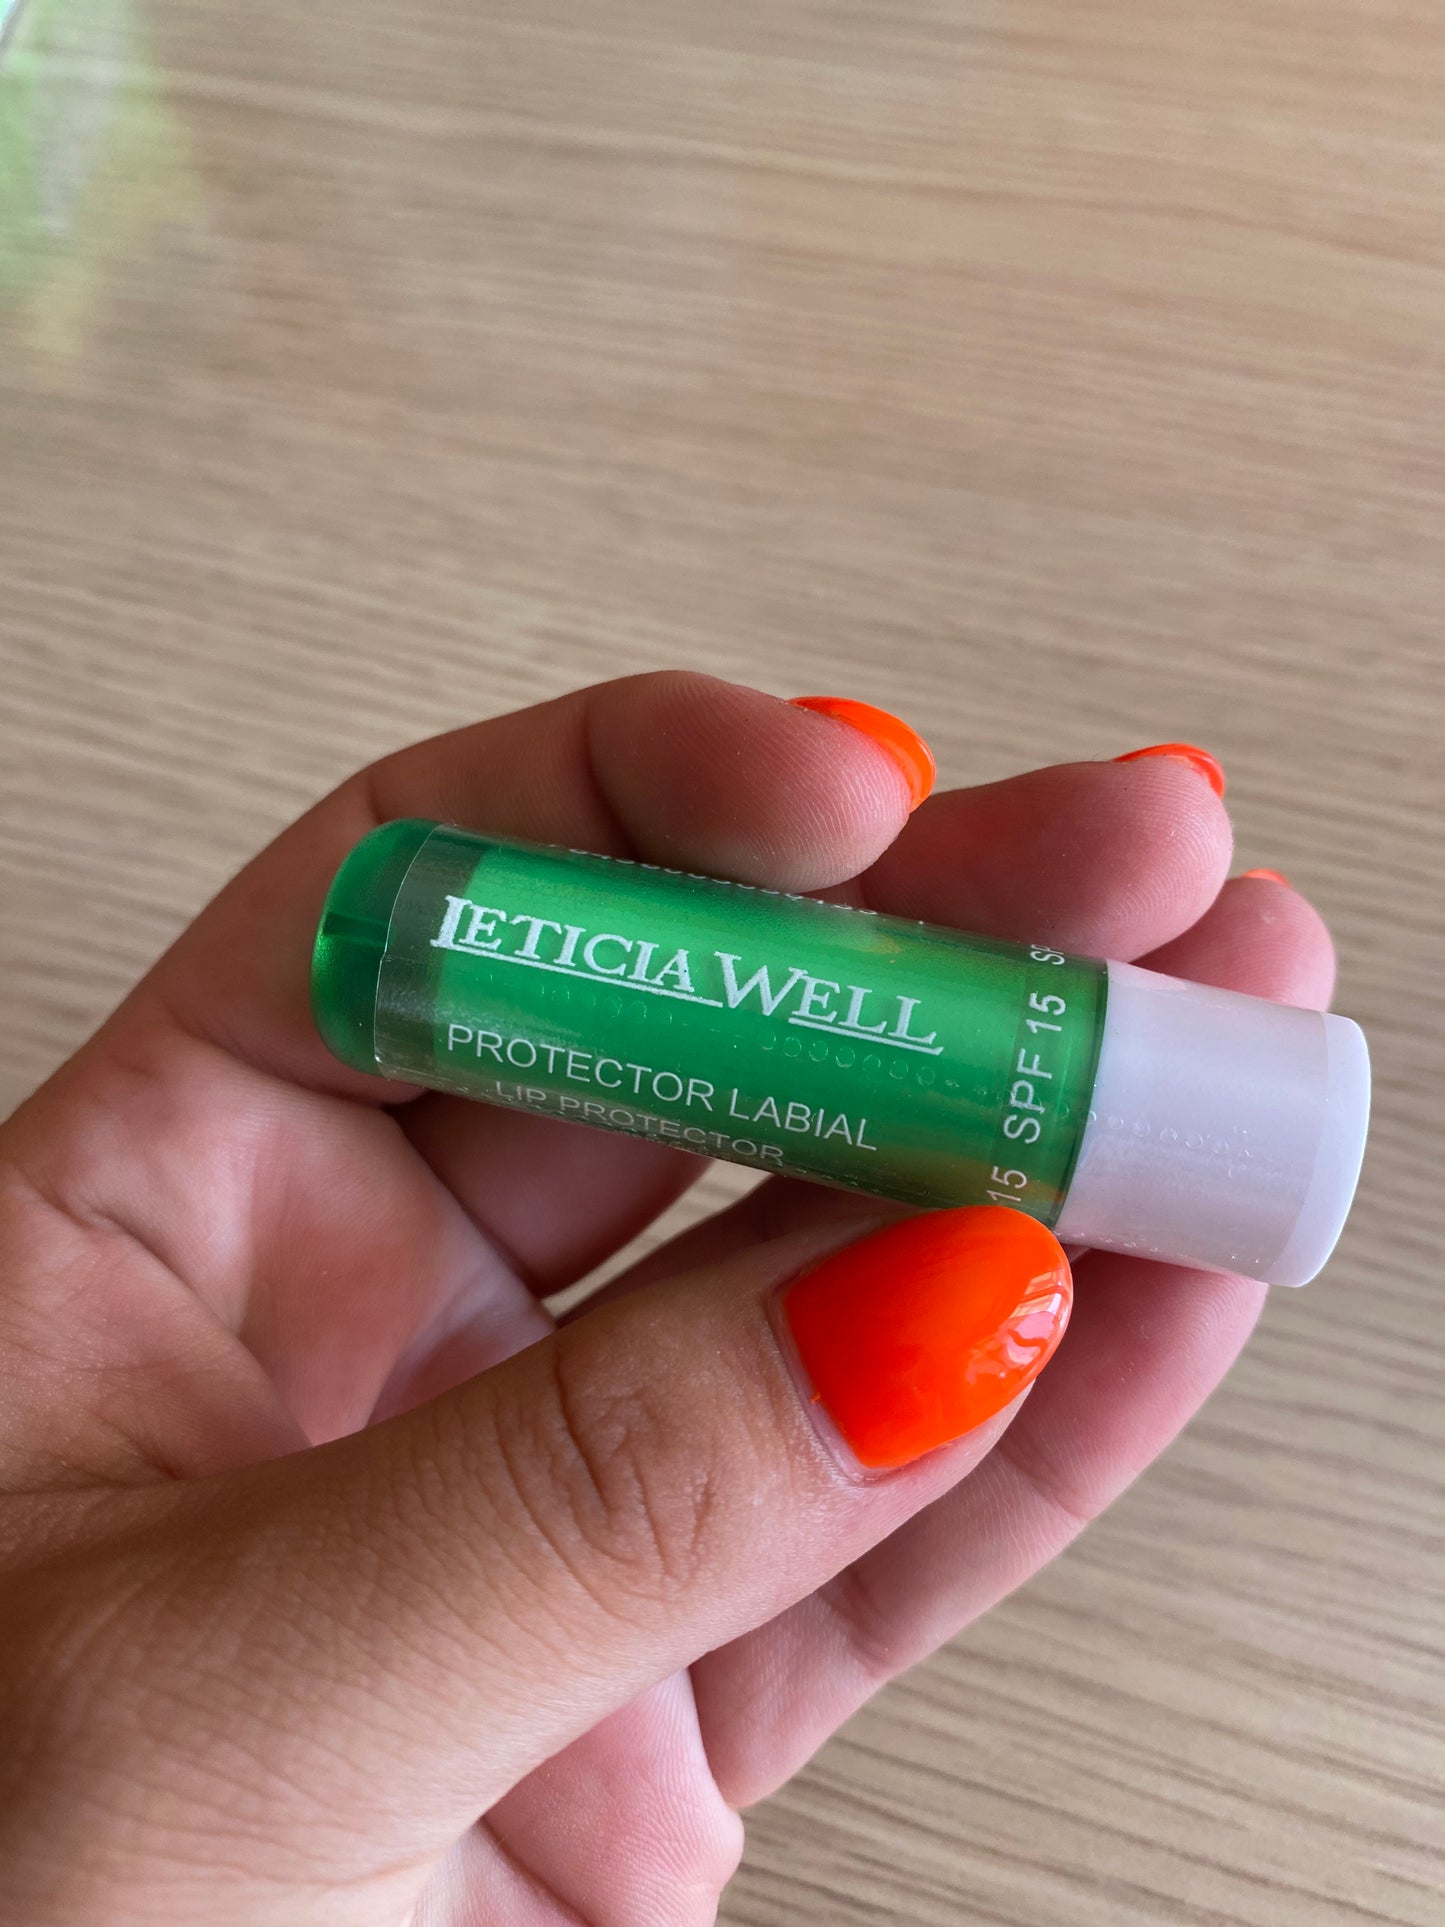 Protector Labial Leticia Well